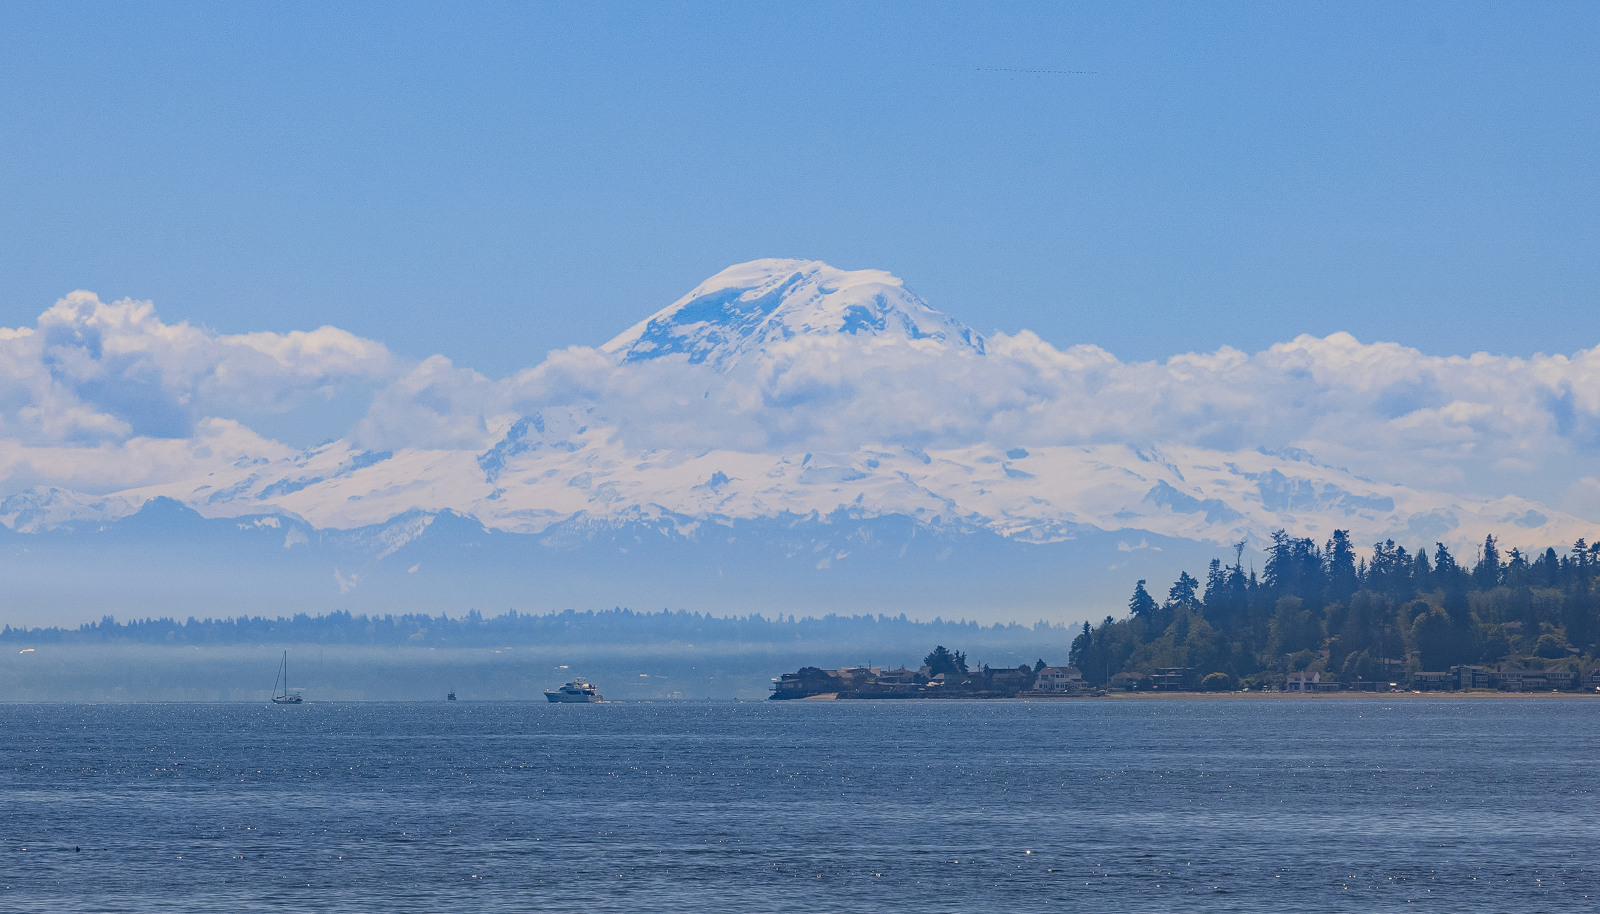 Iconic Mt. Rainier front and center.